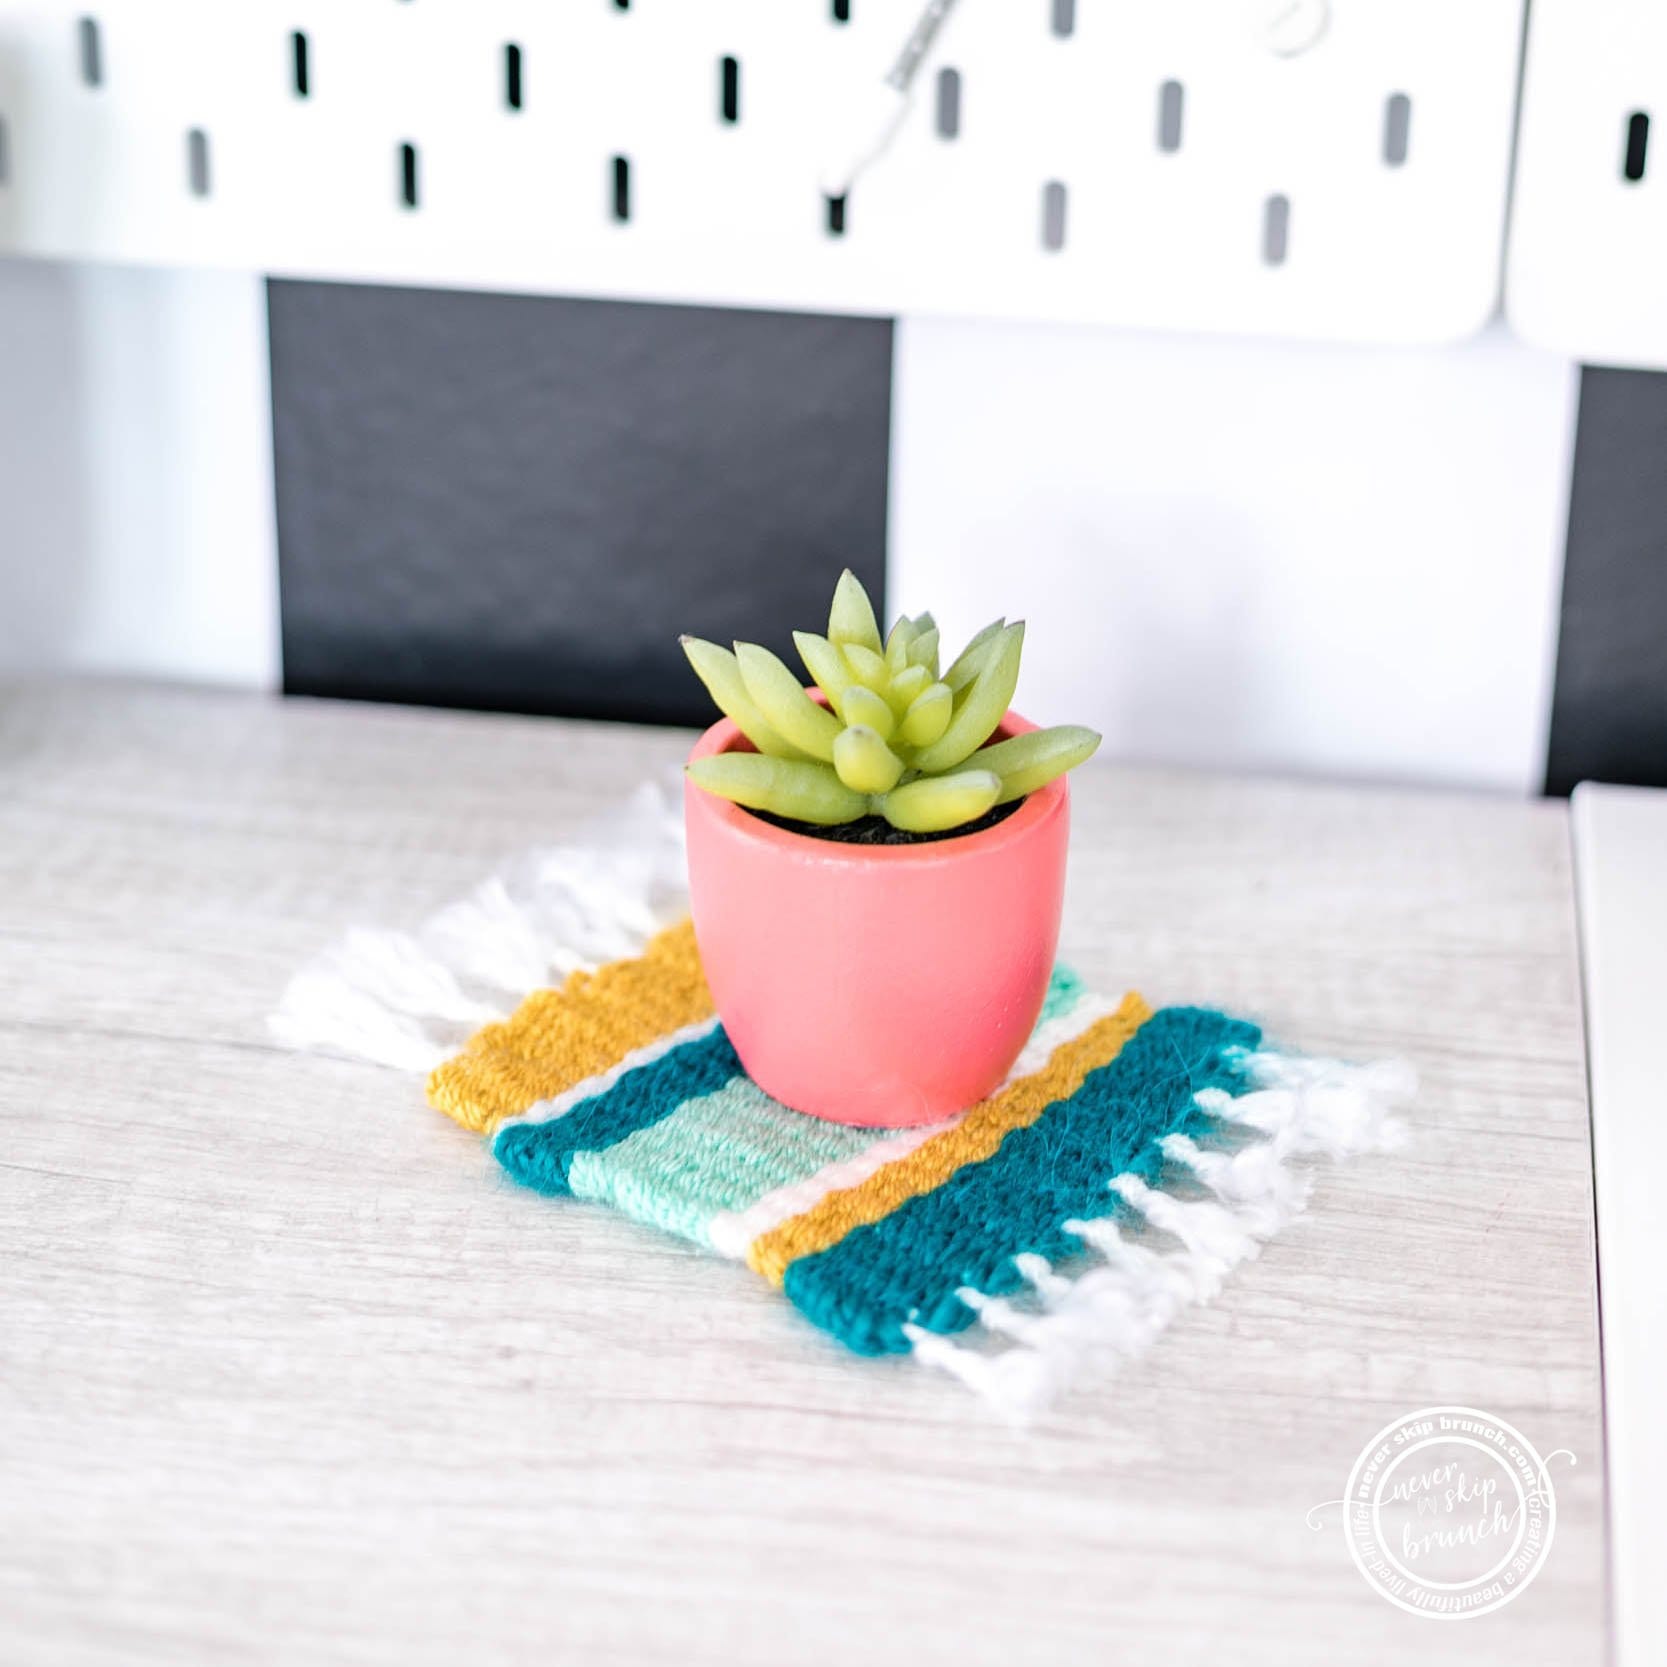 a small potted cactus sits atop a woven mug rug striped in white, turquoise, sage green and gold